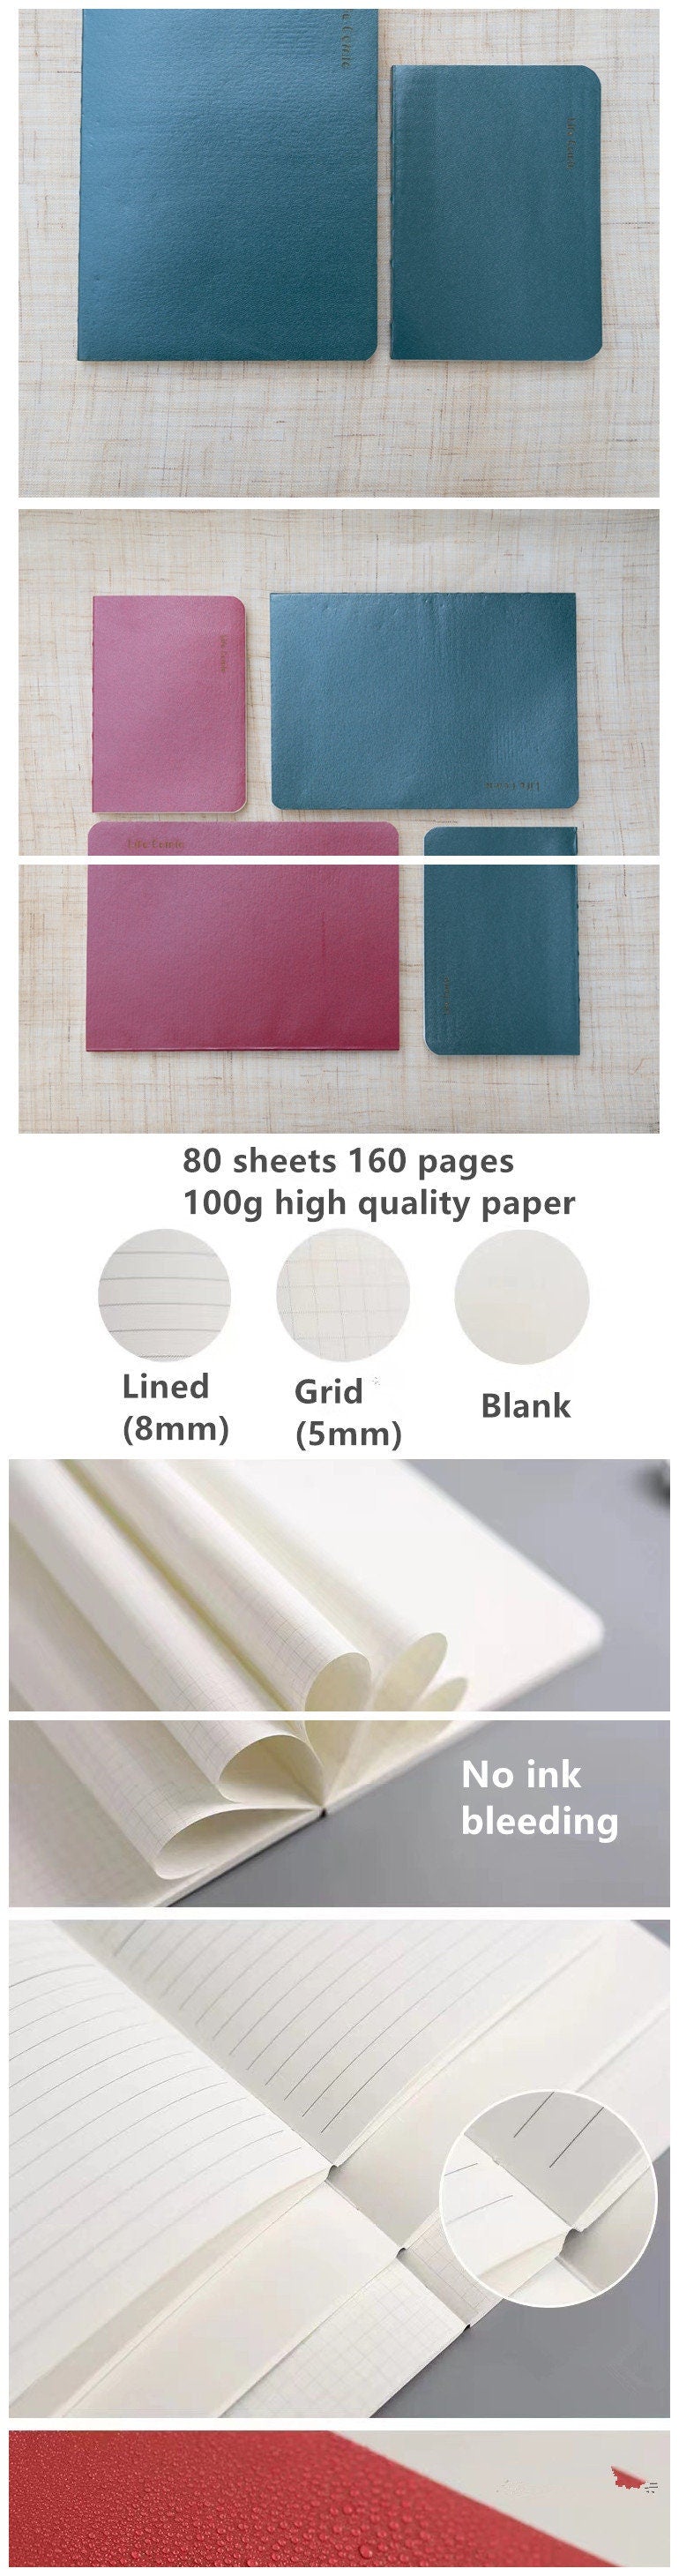 Three-color Cloth Stitching Book Sleeve A5B6A6 Handmade Book Protector Retro Cotton Splicing Book Jacket Literary Notebook Cover Unique Gift